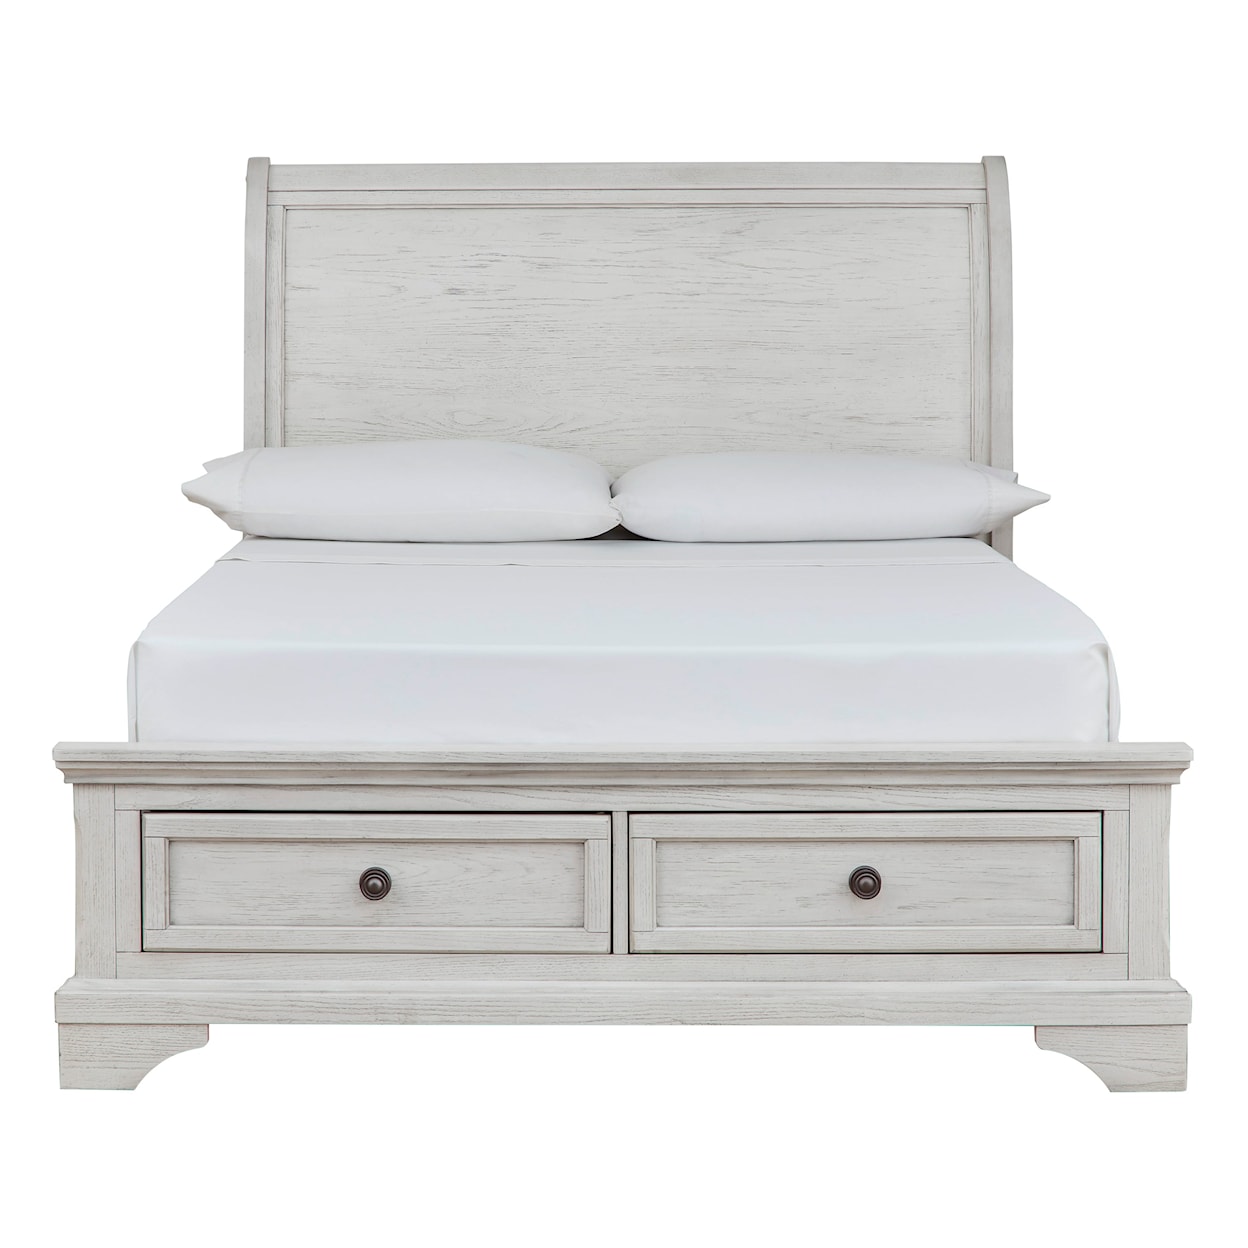 Signature Robbinsdale Full Sleigh Bed with Storage